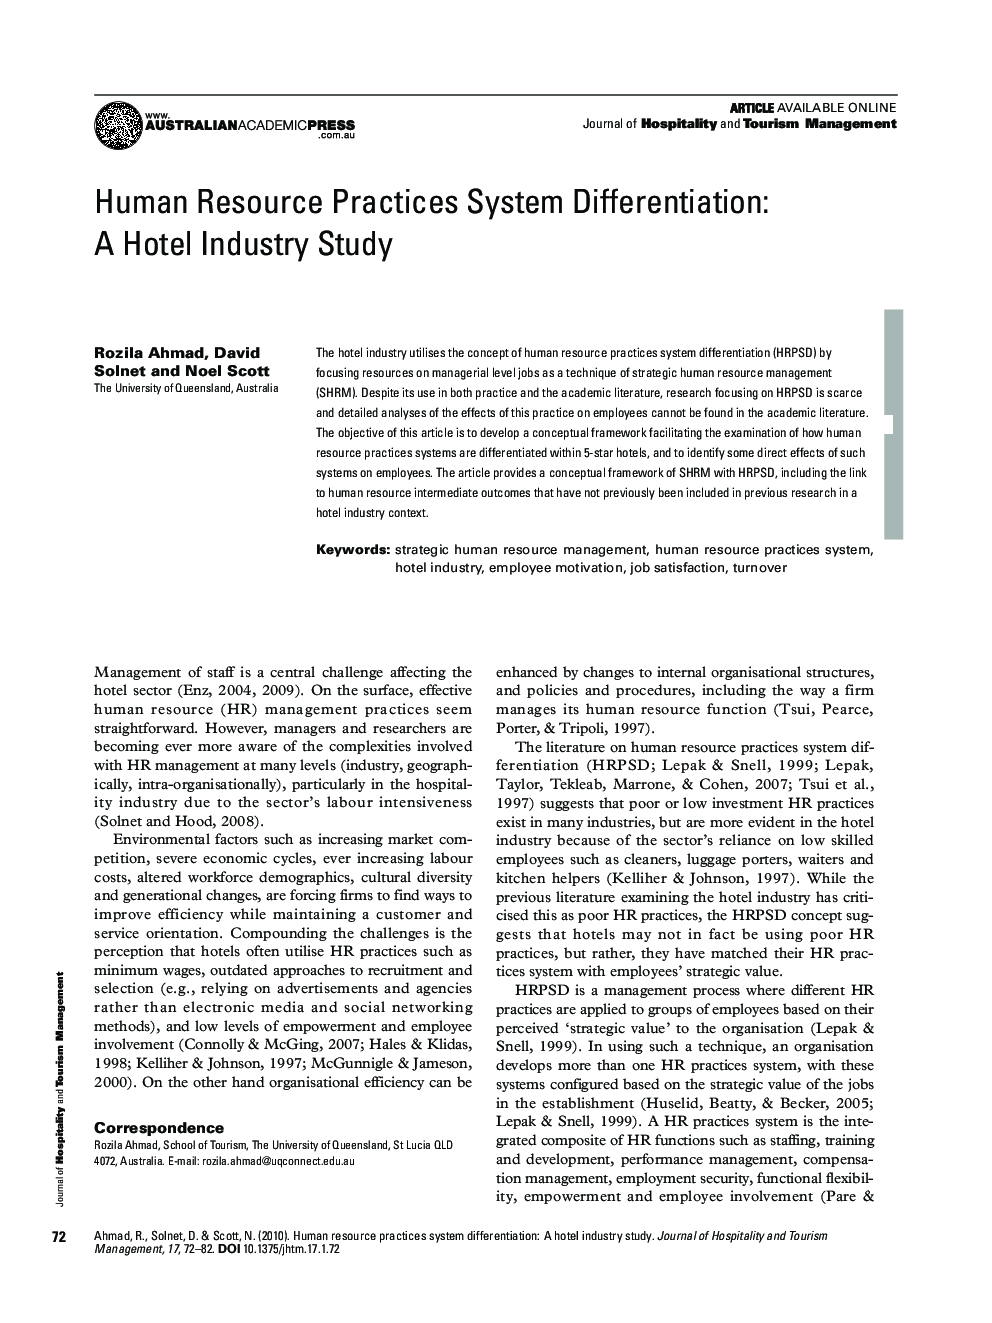 Human Resource Practices System Differentiation: A Hotel Industry Study